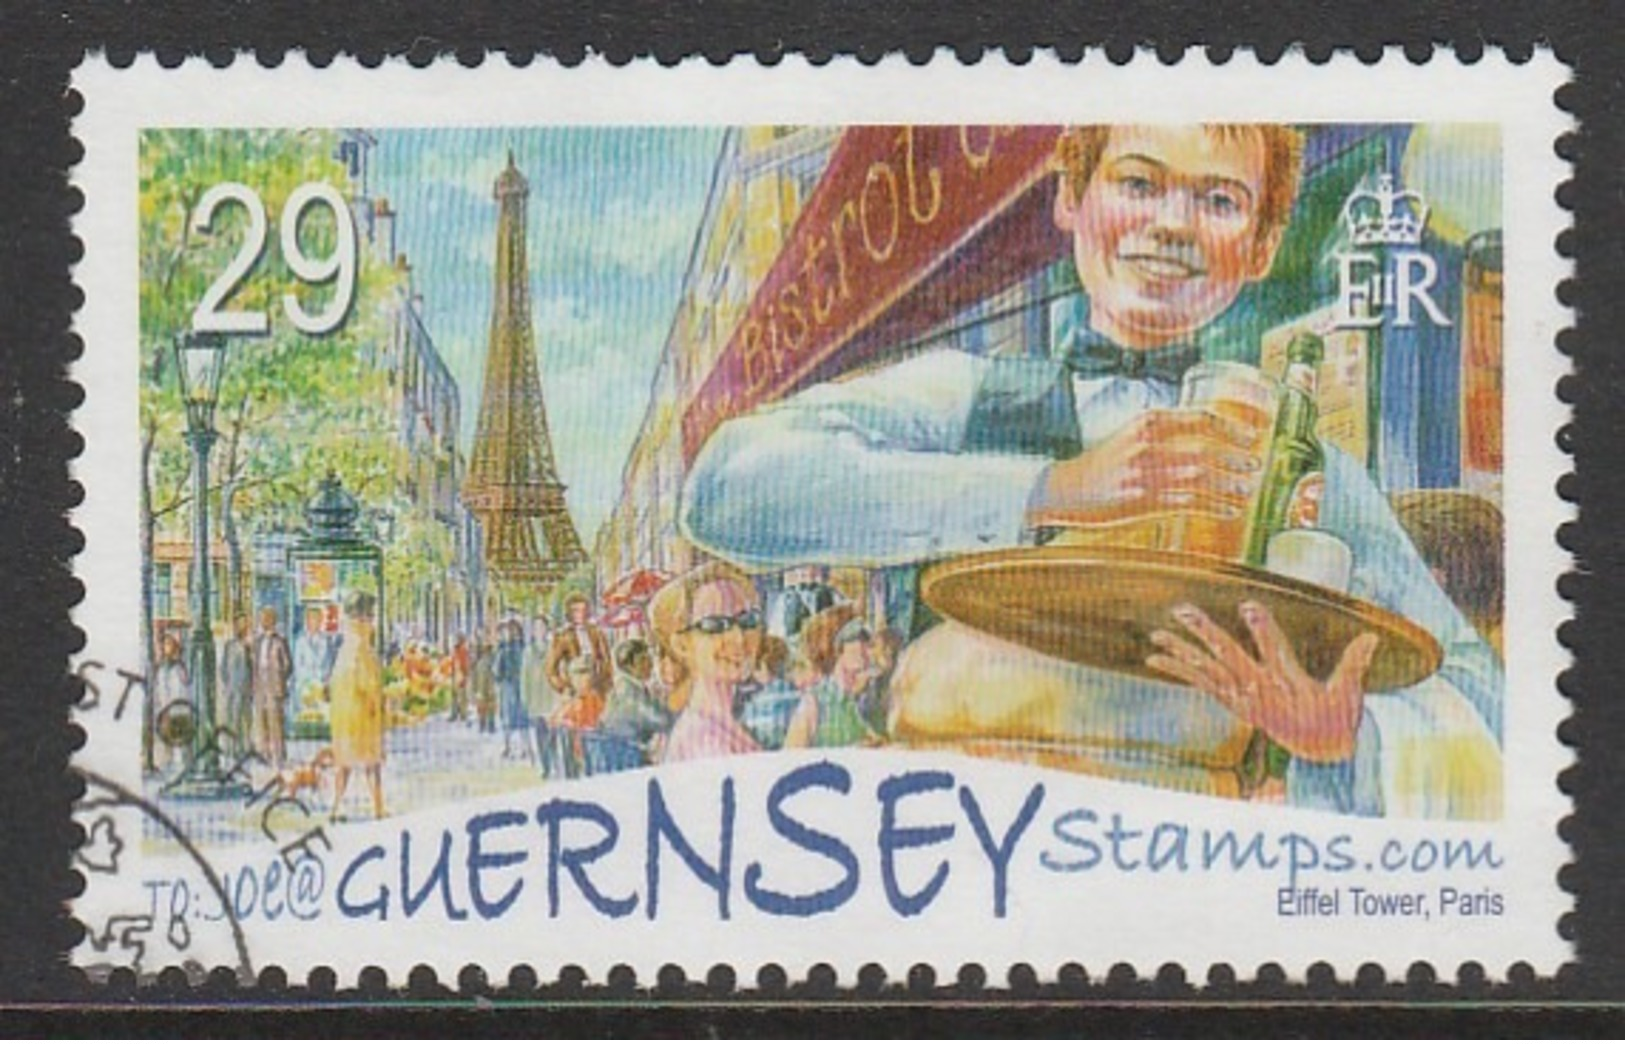 Guernsey 2006 EUROPA Stamps - Integration Through The Eyes Of Young People 29 P Multicoloured SW 1073 O Used - Guernsey